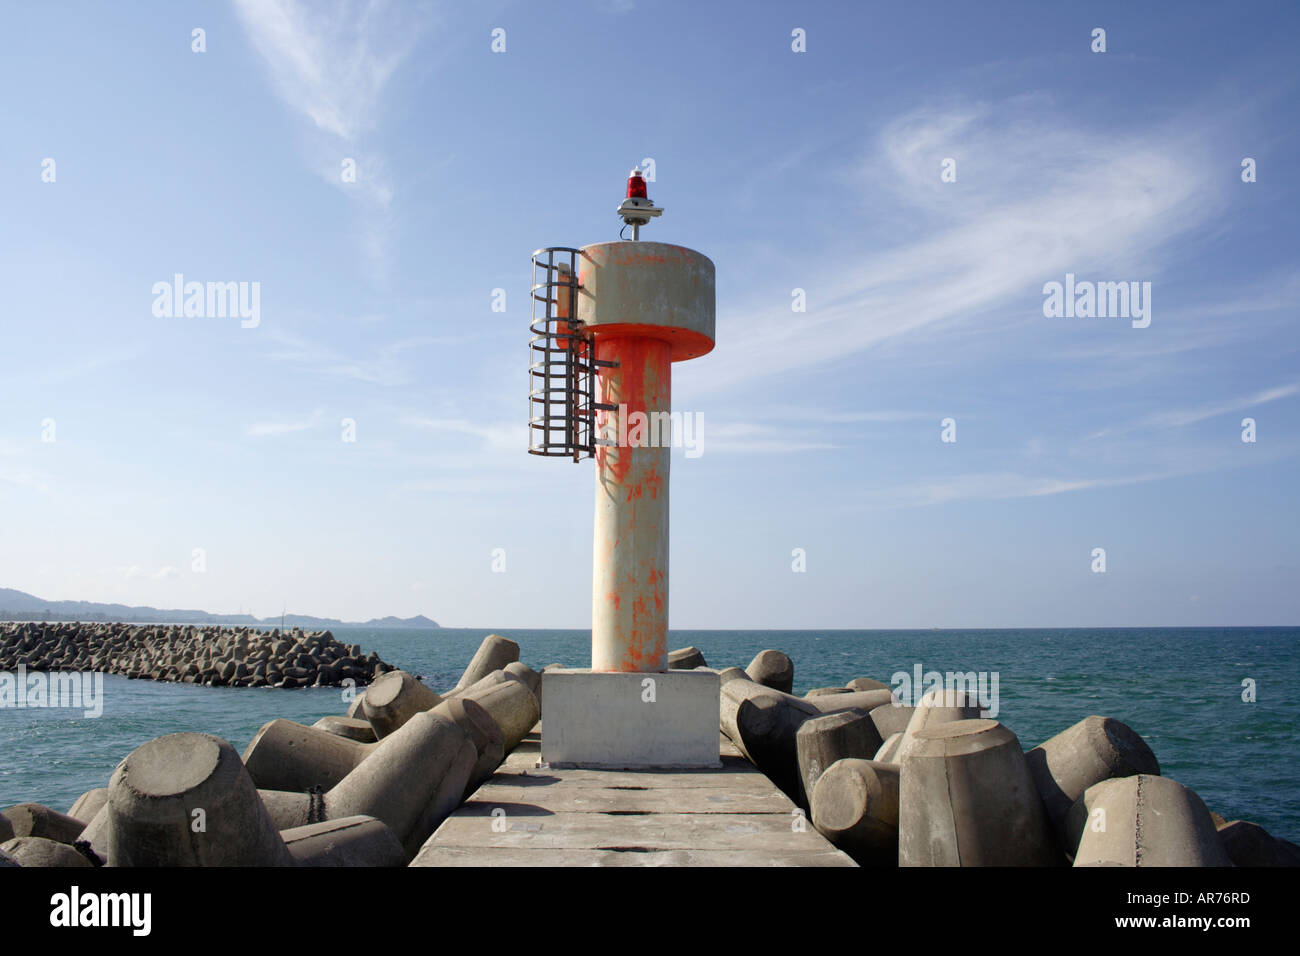 Lighthouse at the entrance of a wave breaker in Malaysia Stock Photo